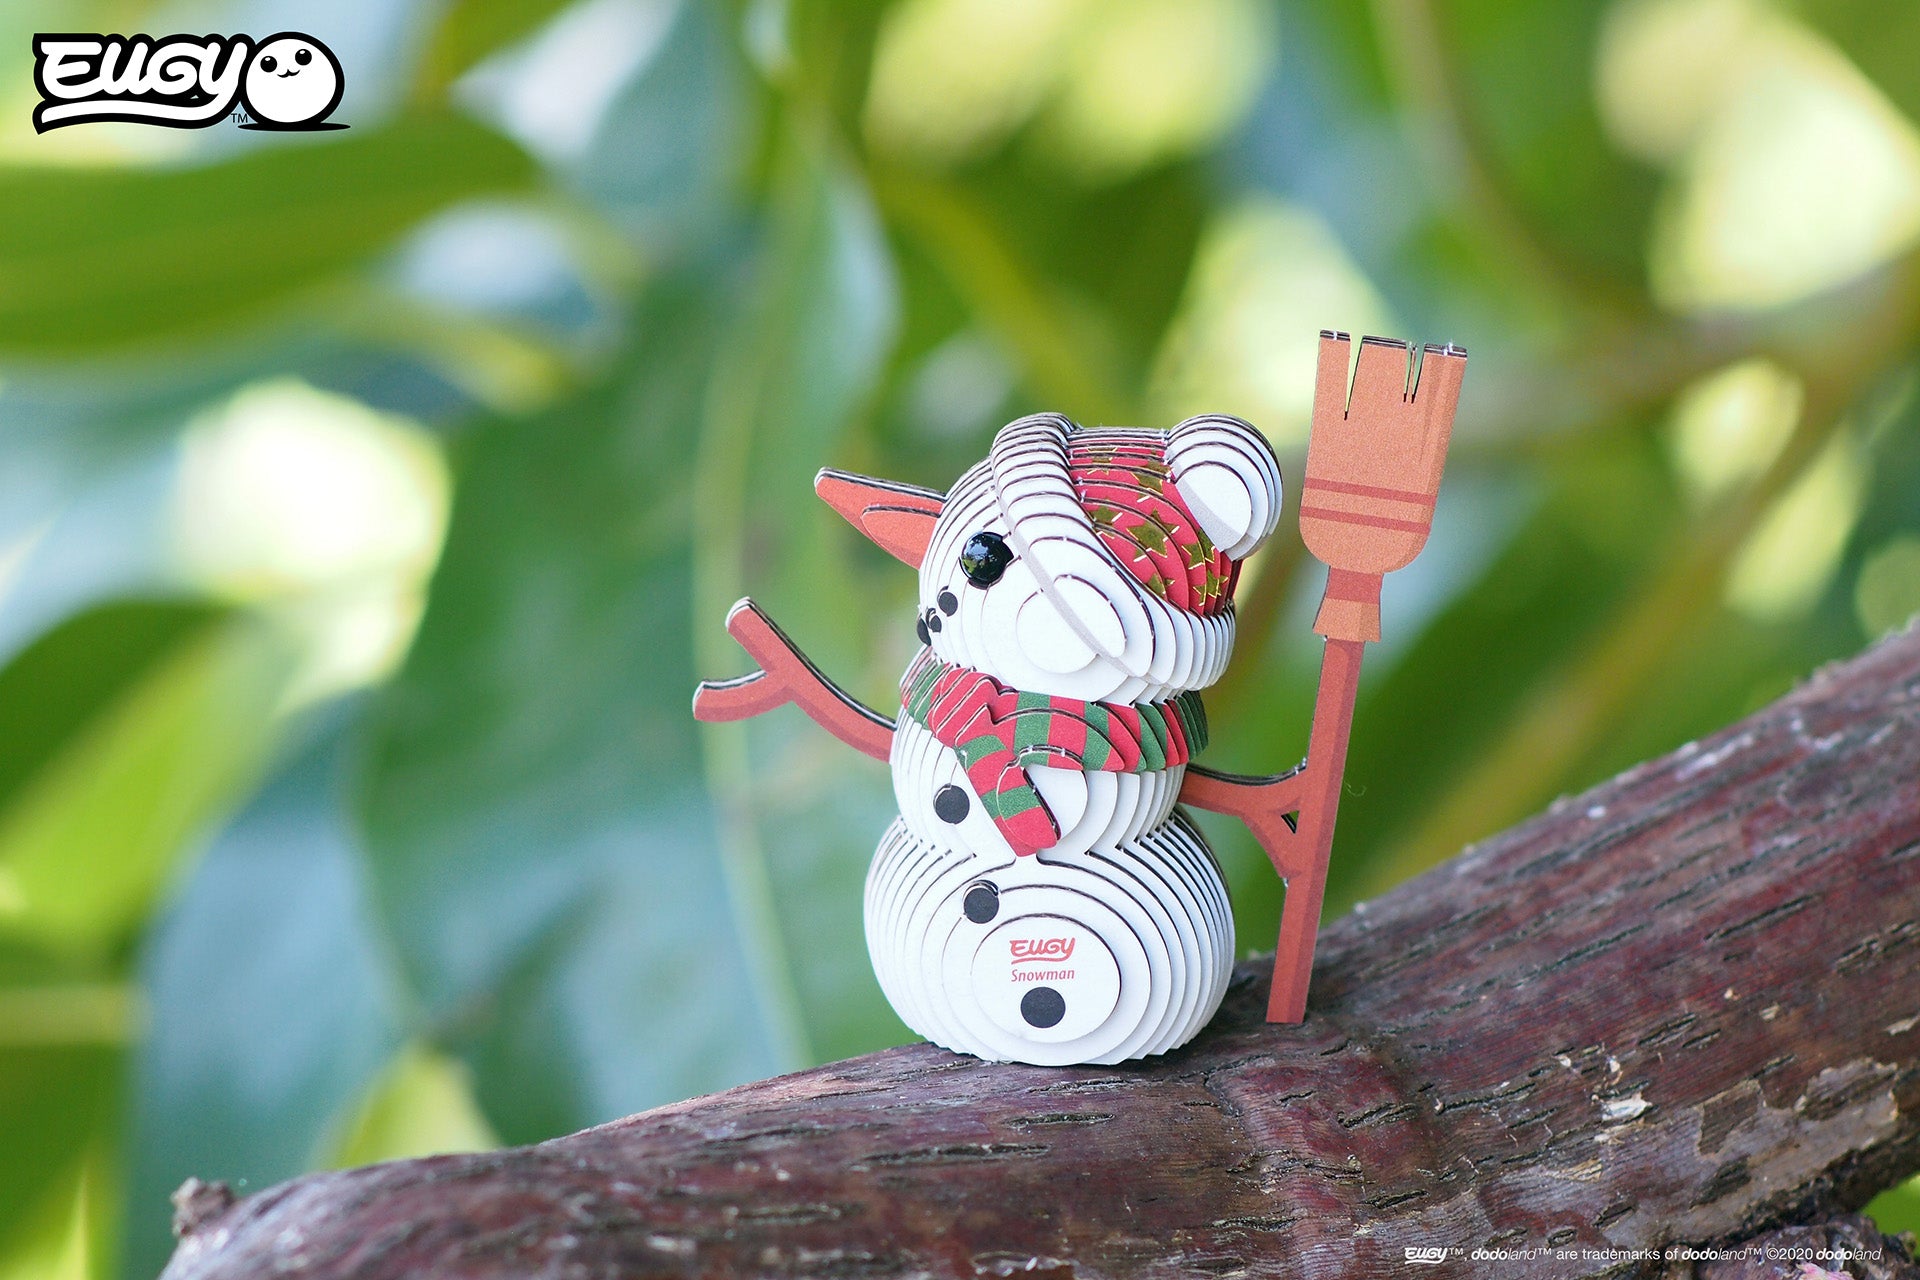 Image of an EUGY Snowman, facing left but viewed from the front & sitting on tree branch in front of a blurred leafy background